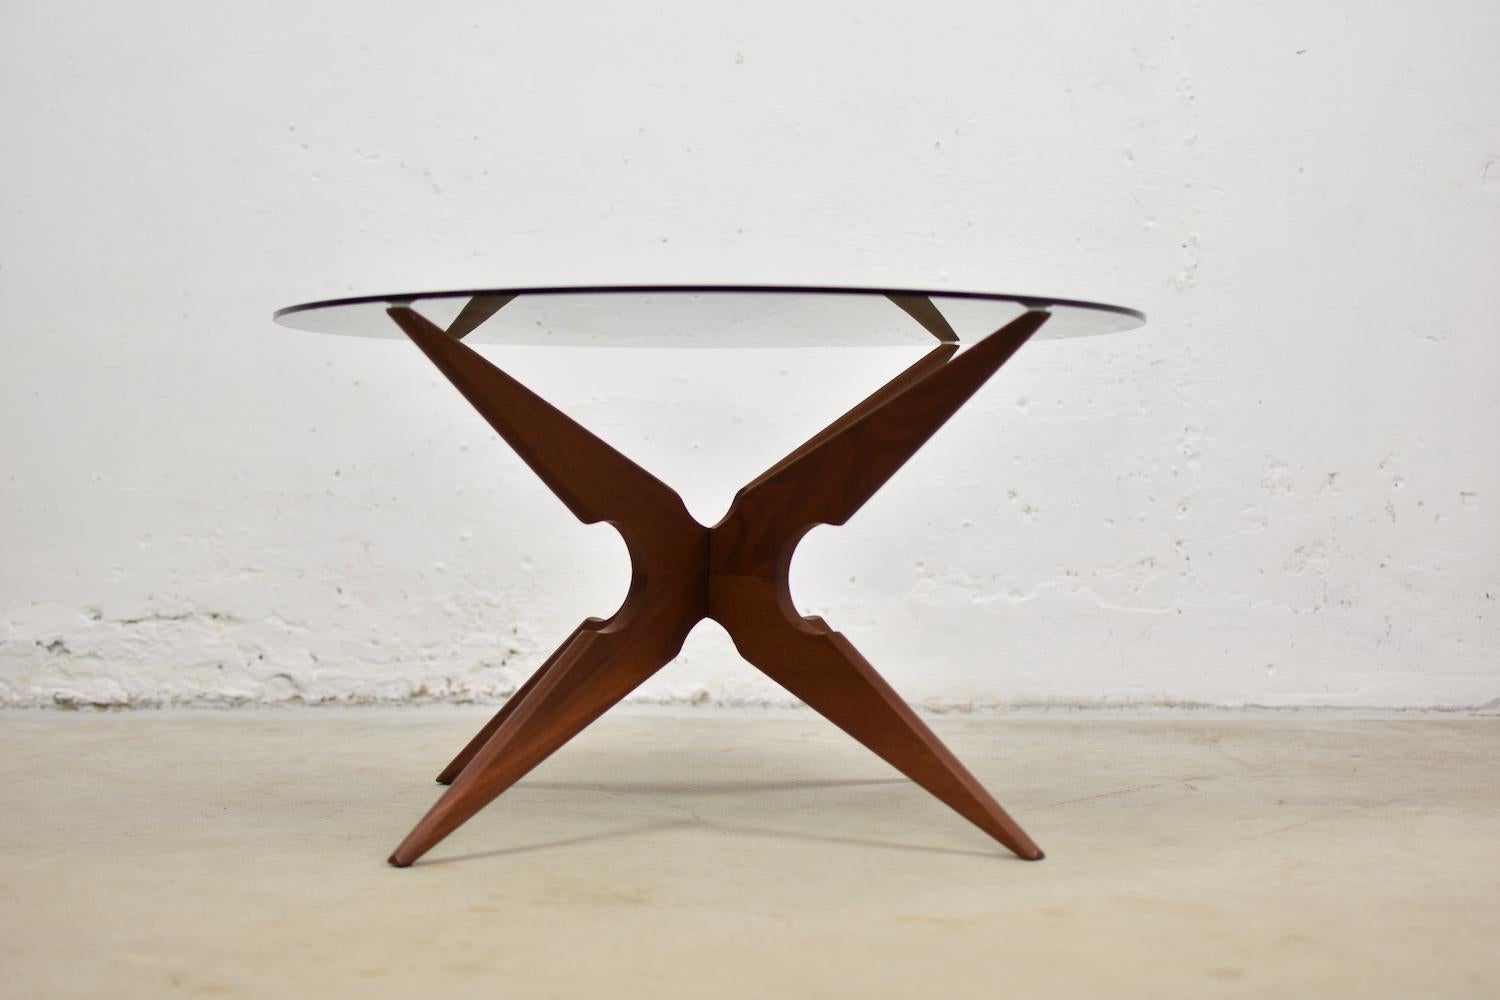 Organic ‘spider’ shaped coffee table by Vladimir Kagan for Sika Møbler, Denmark, 1960s. The base of this coffee table features a pair of teak parts forming a star holding the original glass top. Some normal signs of age and use (two chips on the